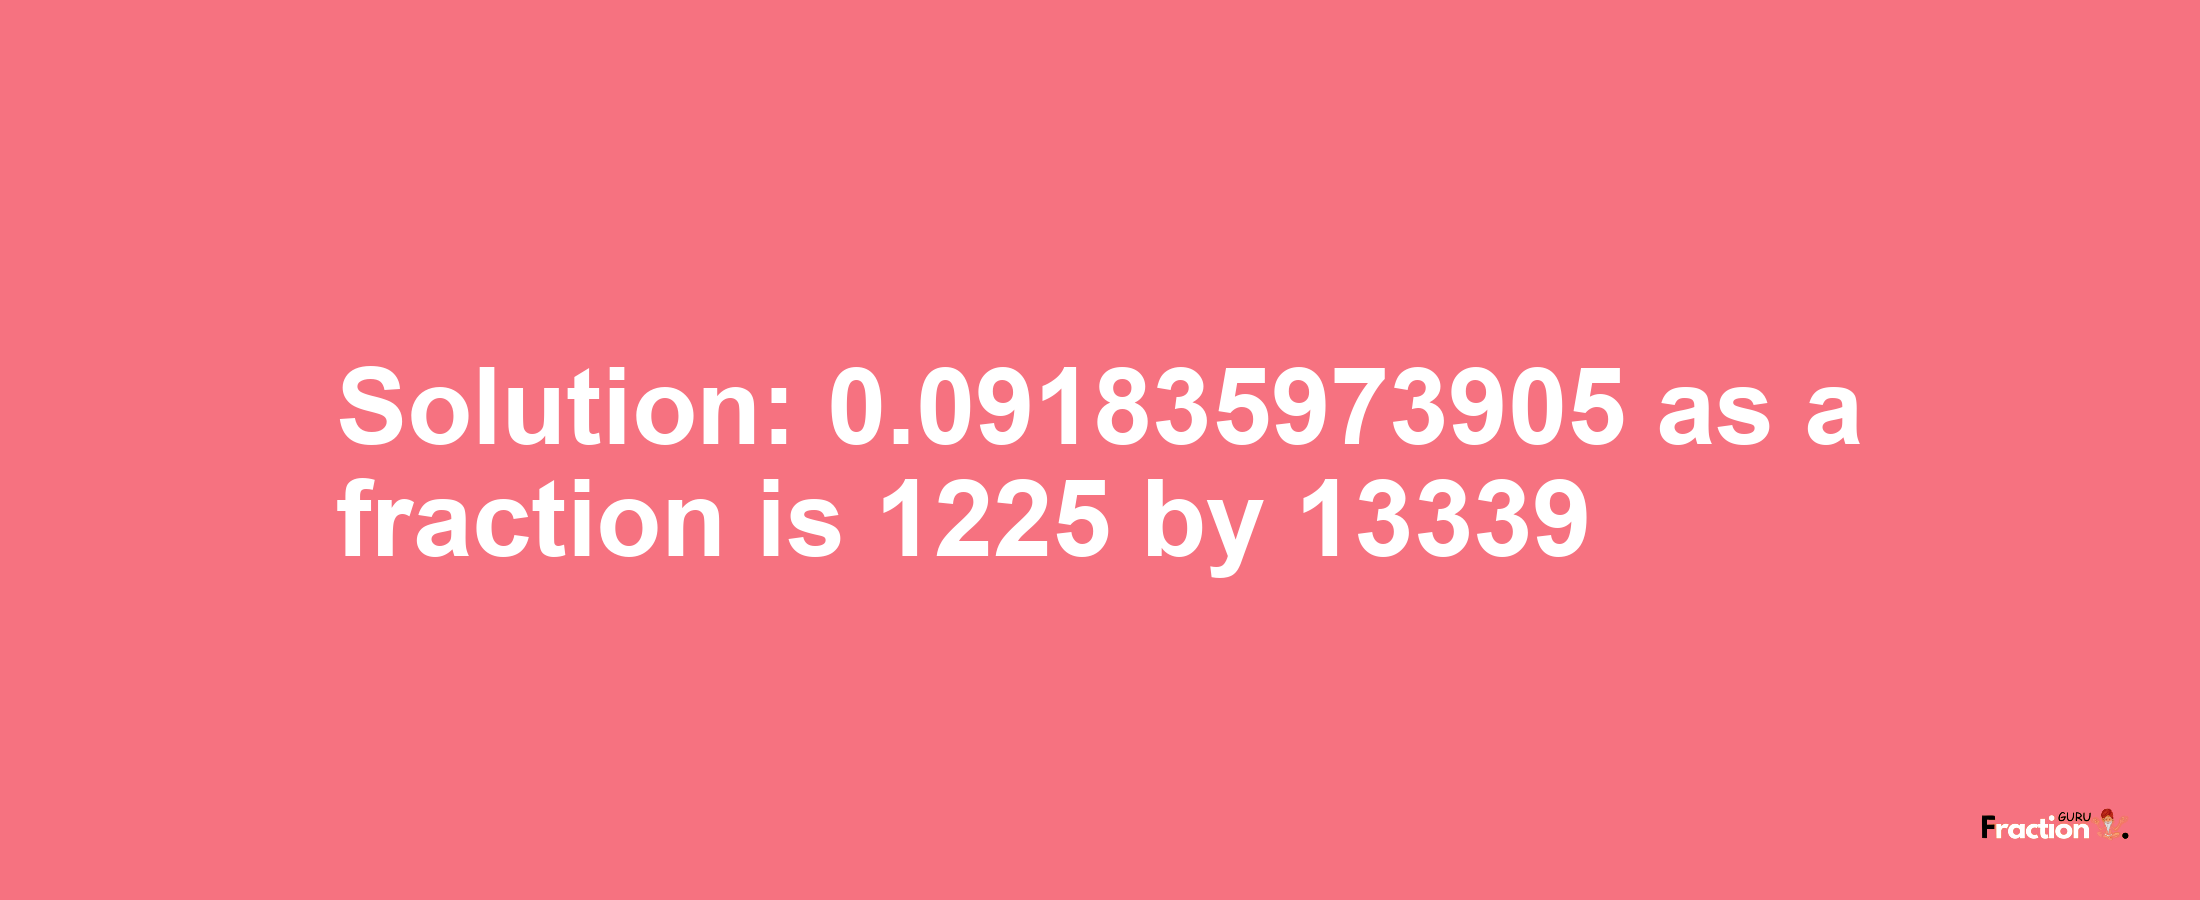 Solution:0.091835973905 as a fraction is 1225/13339